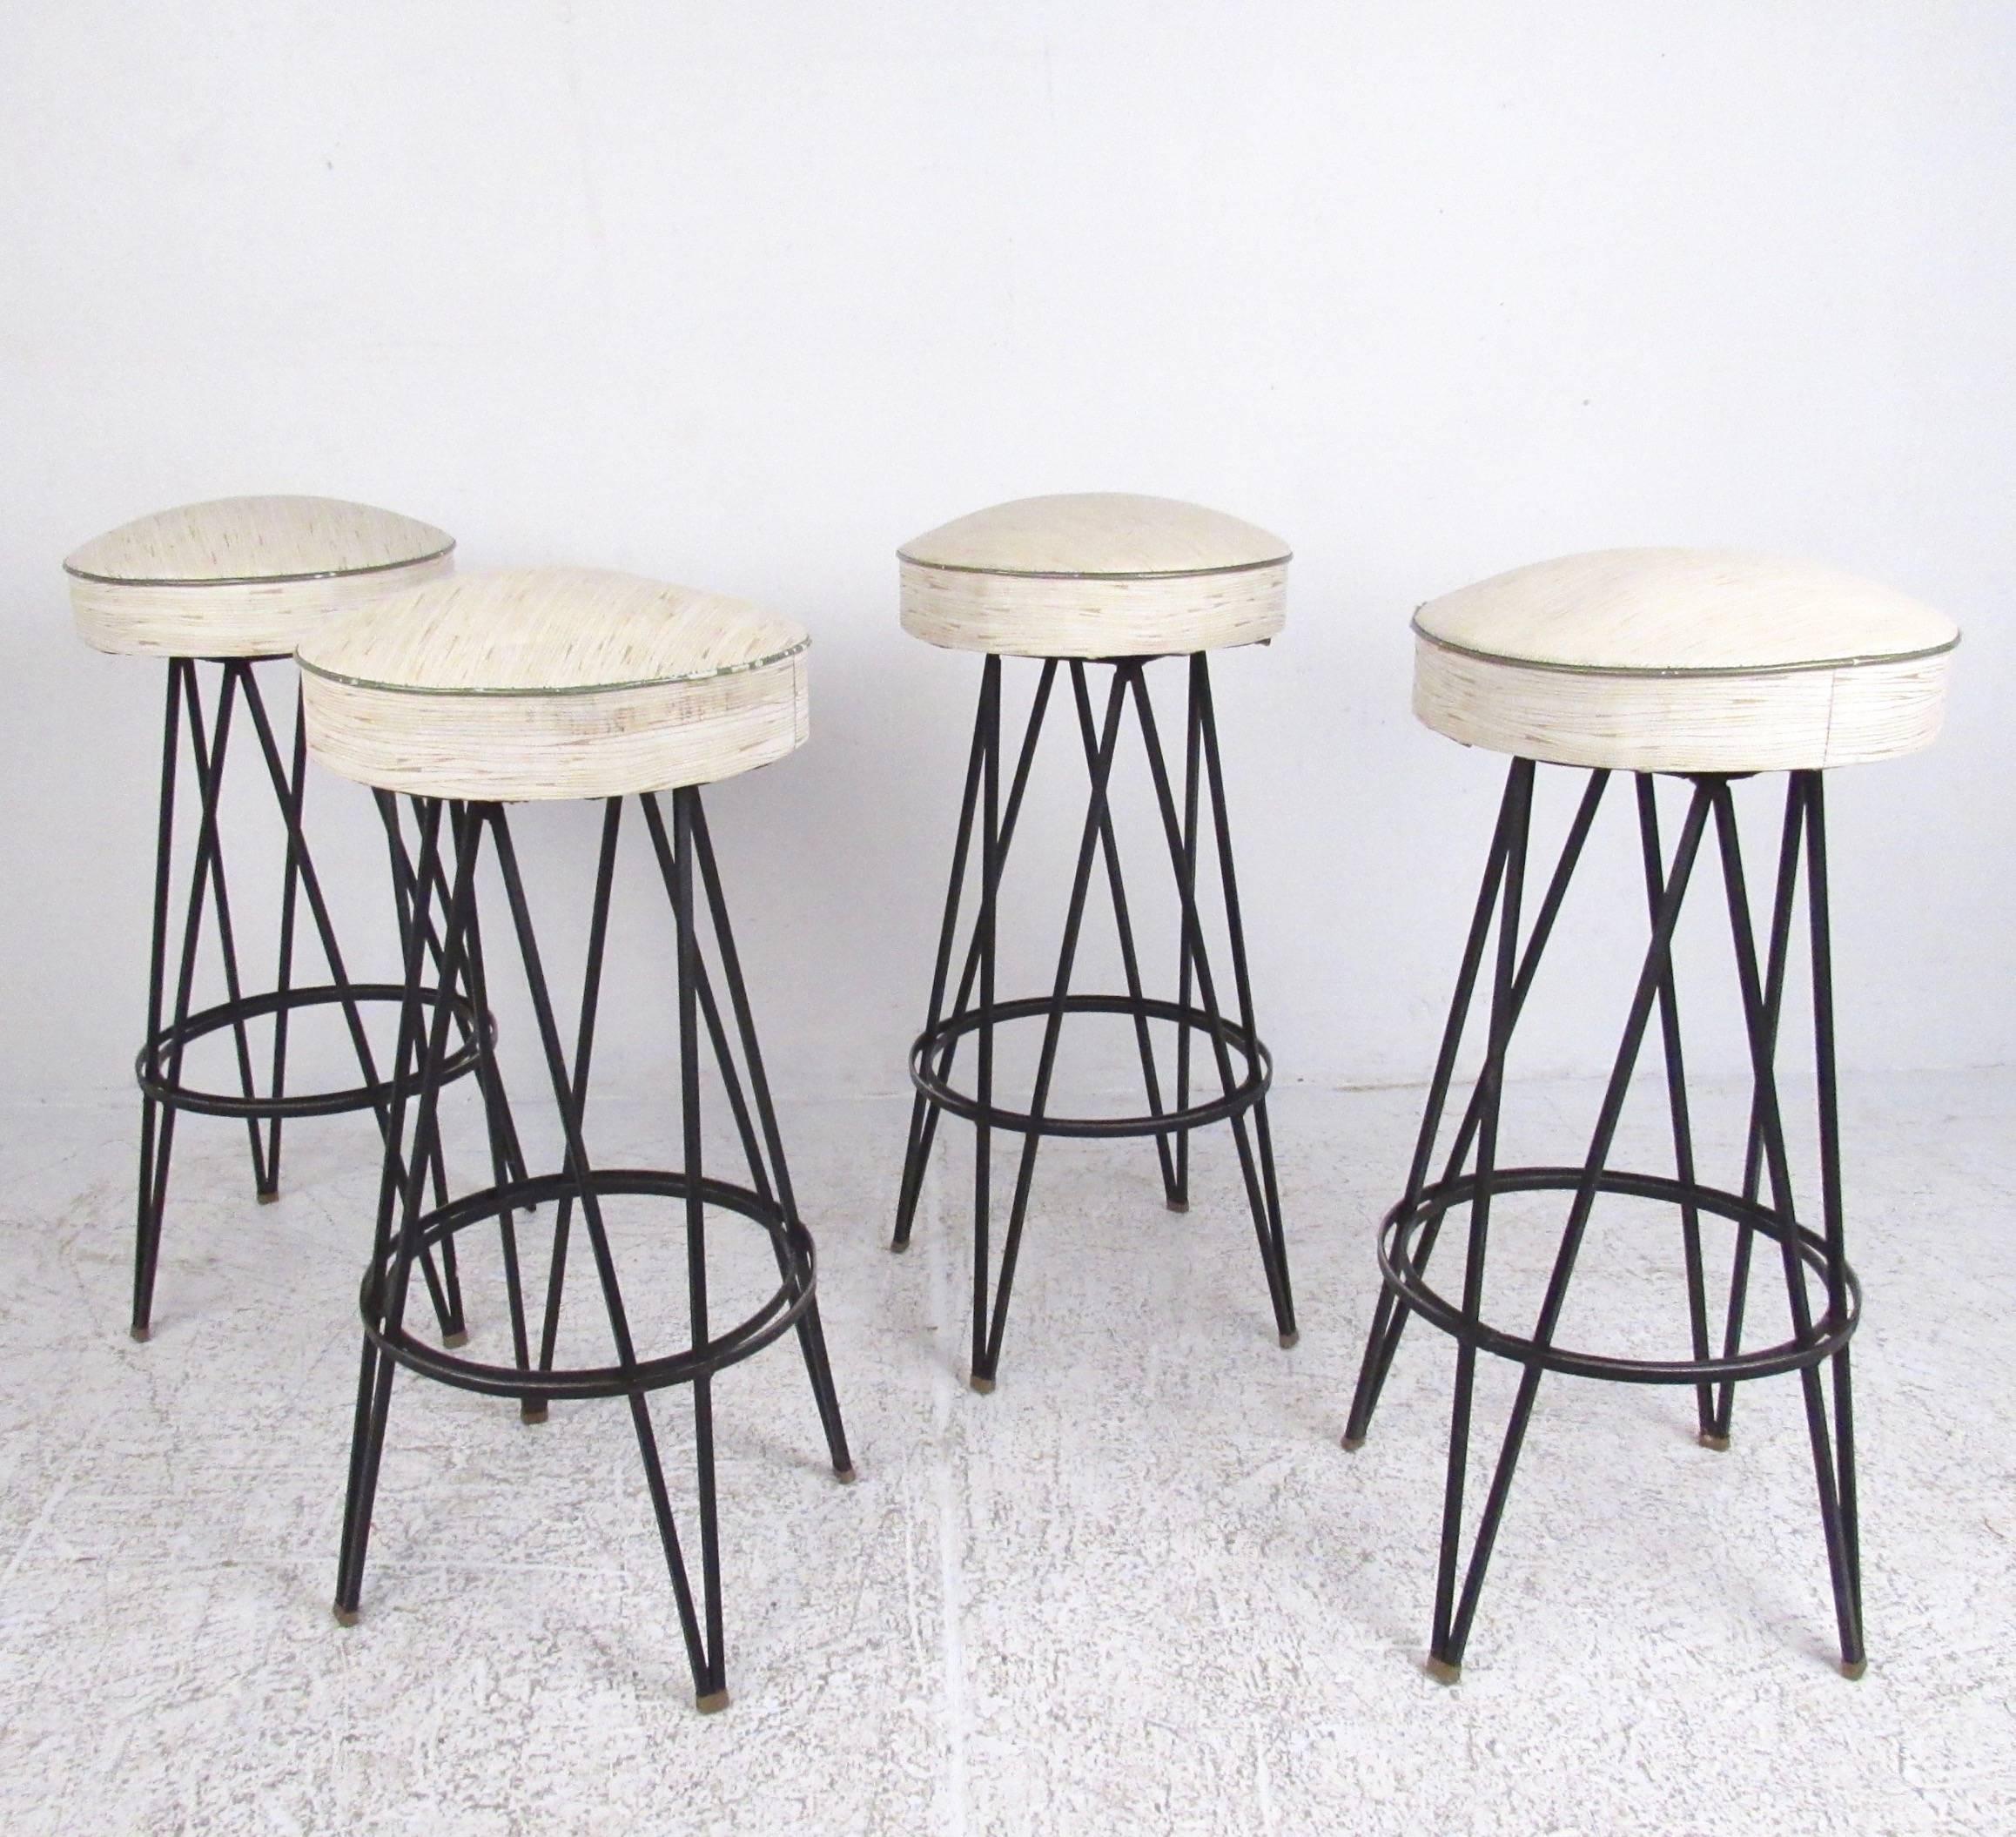 This unique set of four vintage bar stools feature timeless mid-century modern design, vinyl swivel seats, and sturdy iron hairpin legs. At a 31 inch seat height this set of bar height stools includes the original vintage finish, distinctive style,